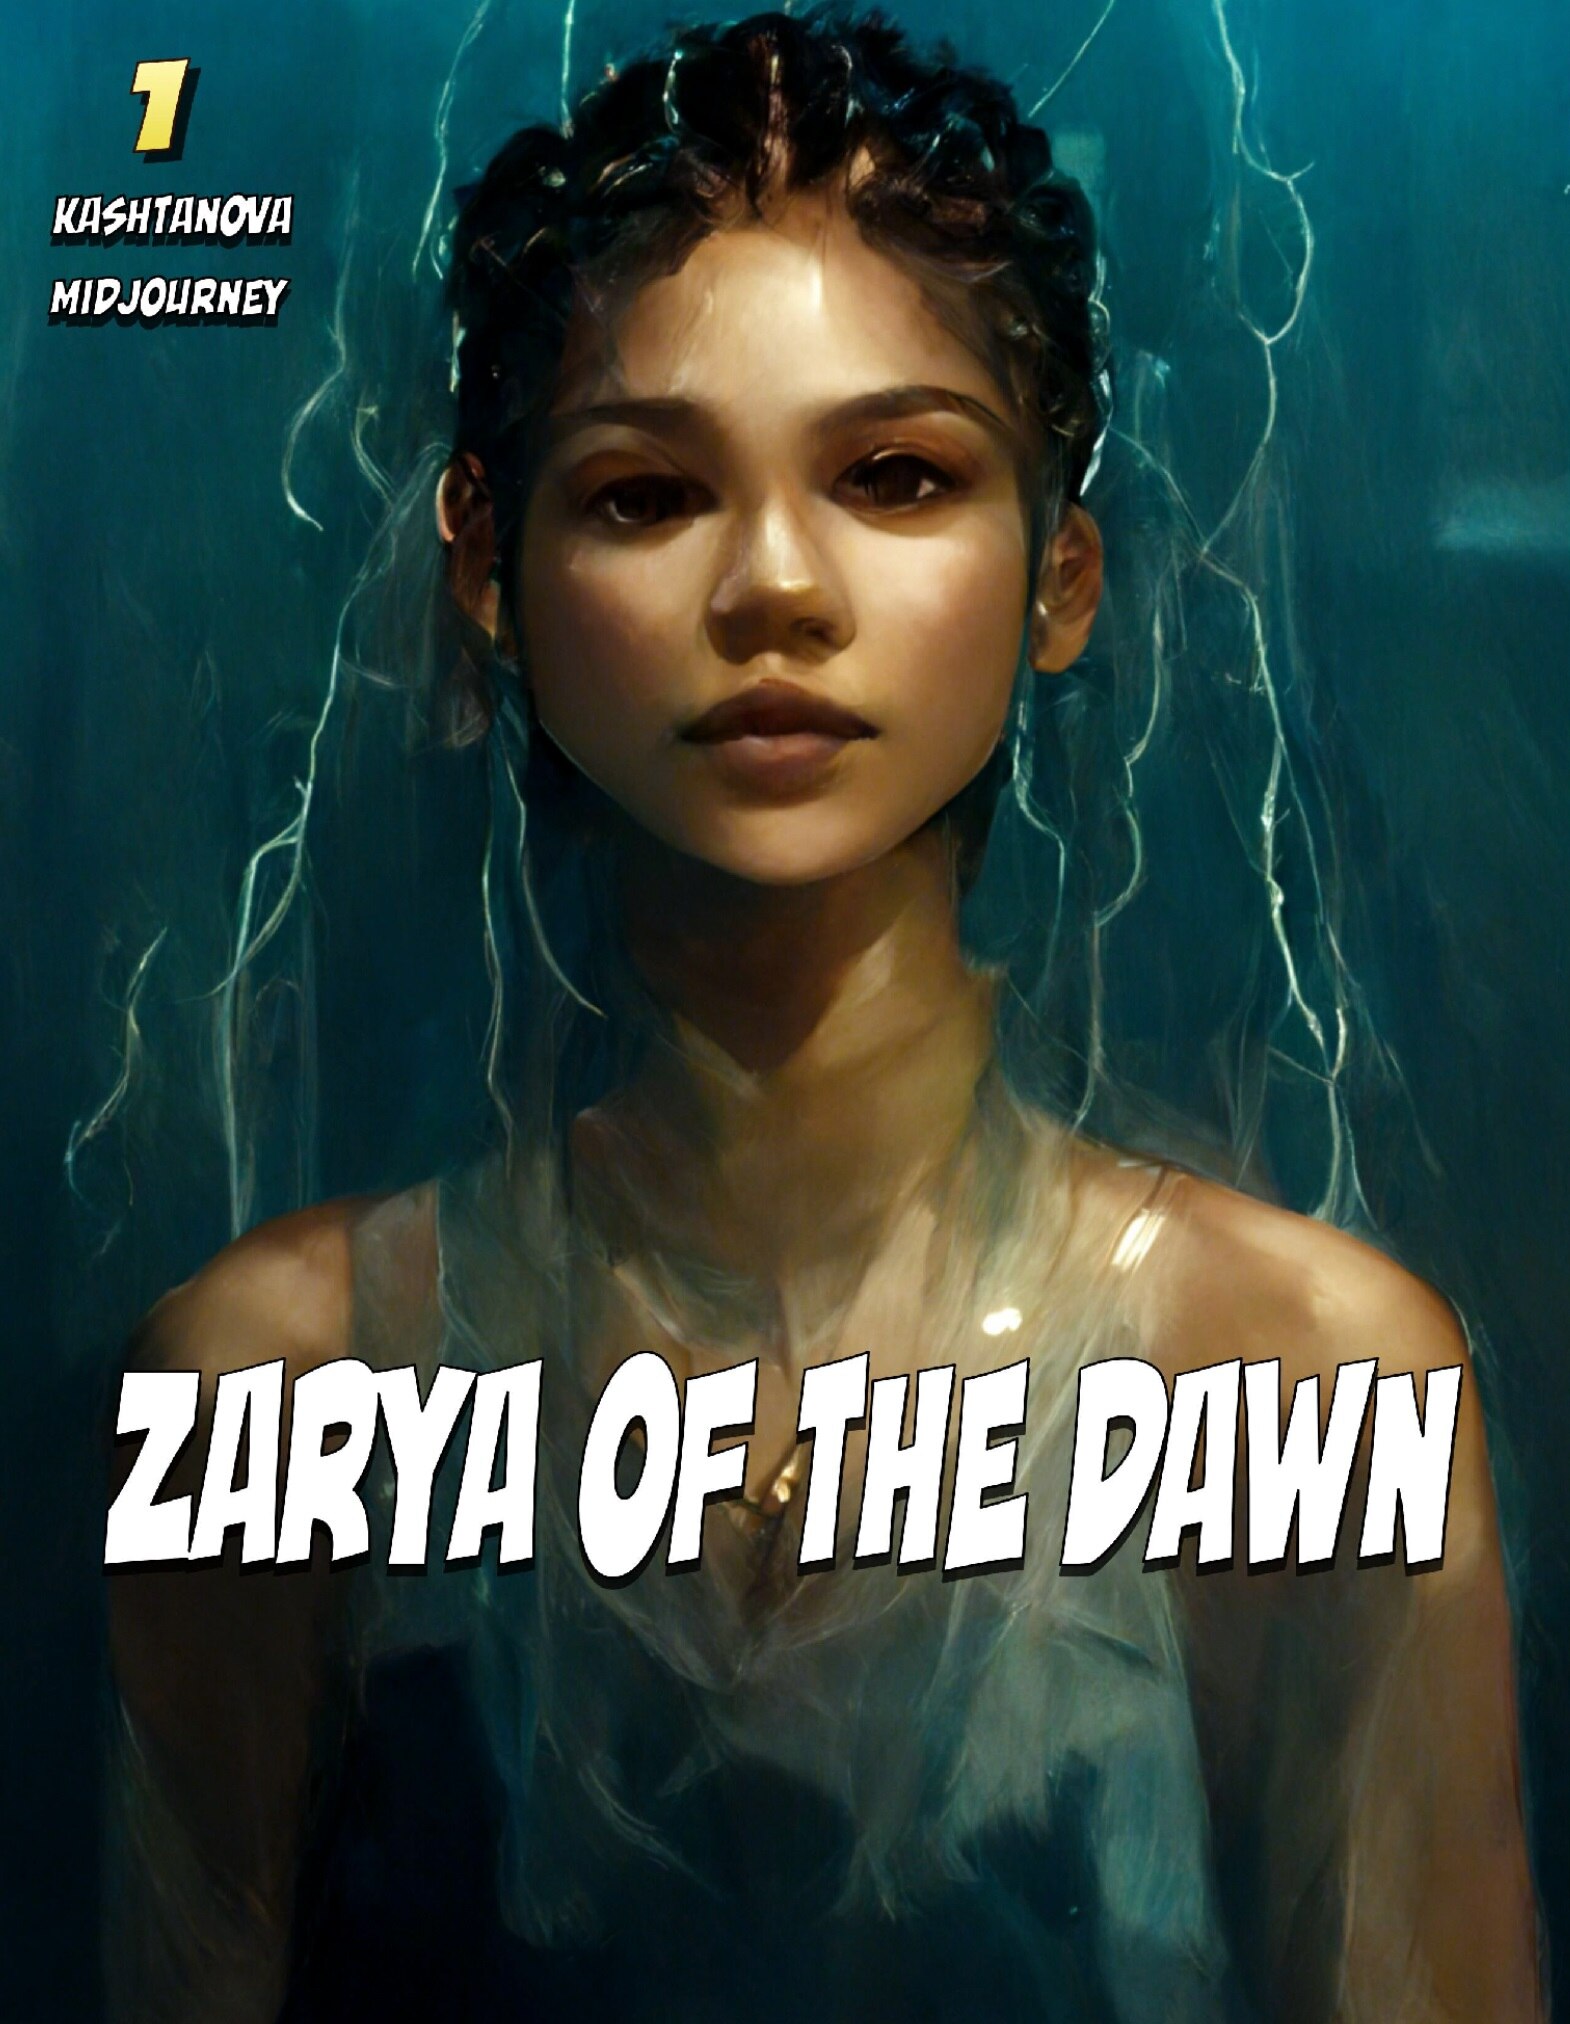 A comic book cover in a painted style, showing a young woman who looks like the actor Zendaya.